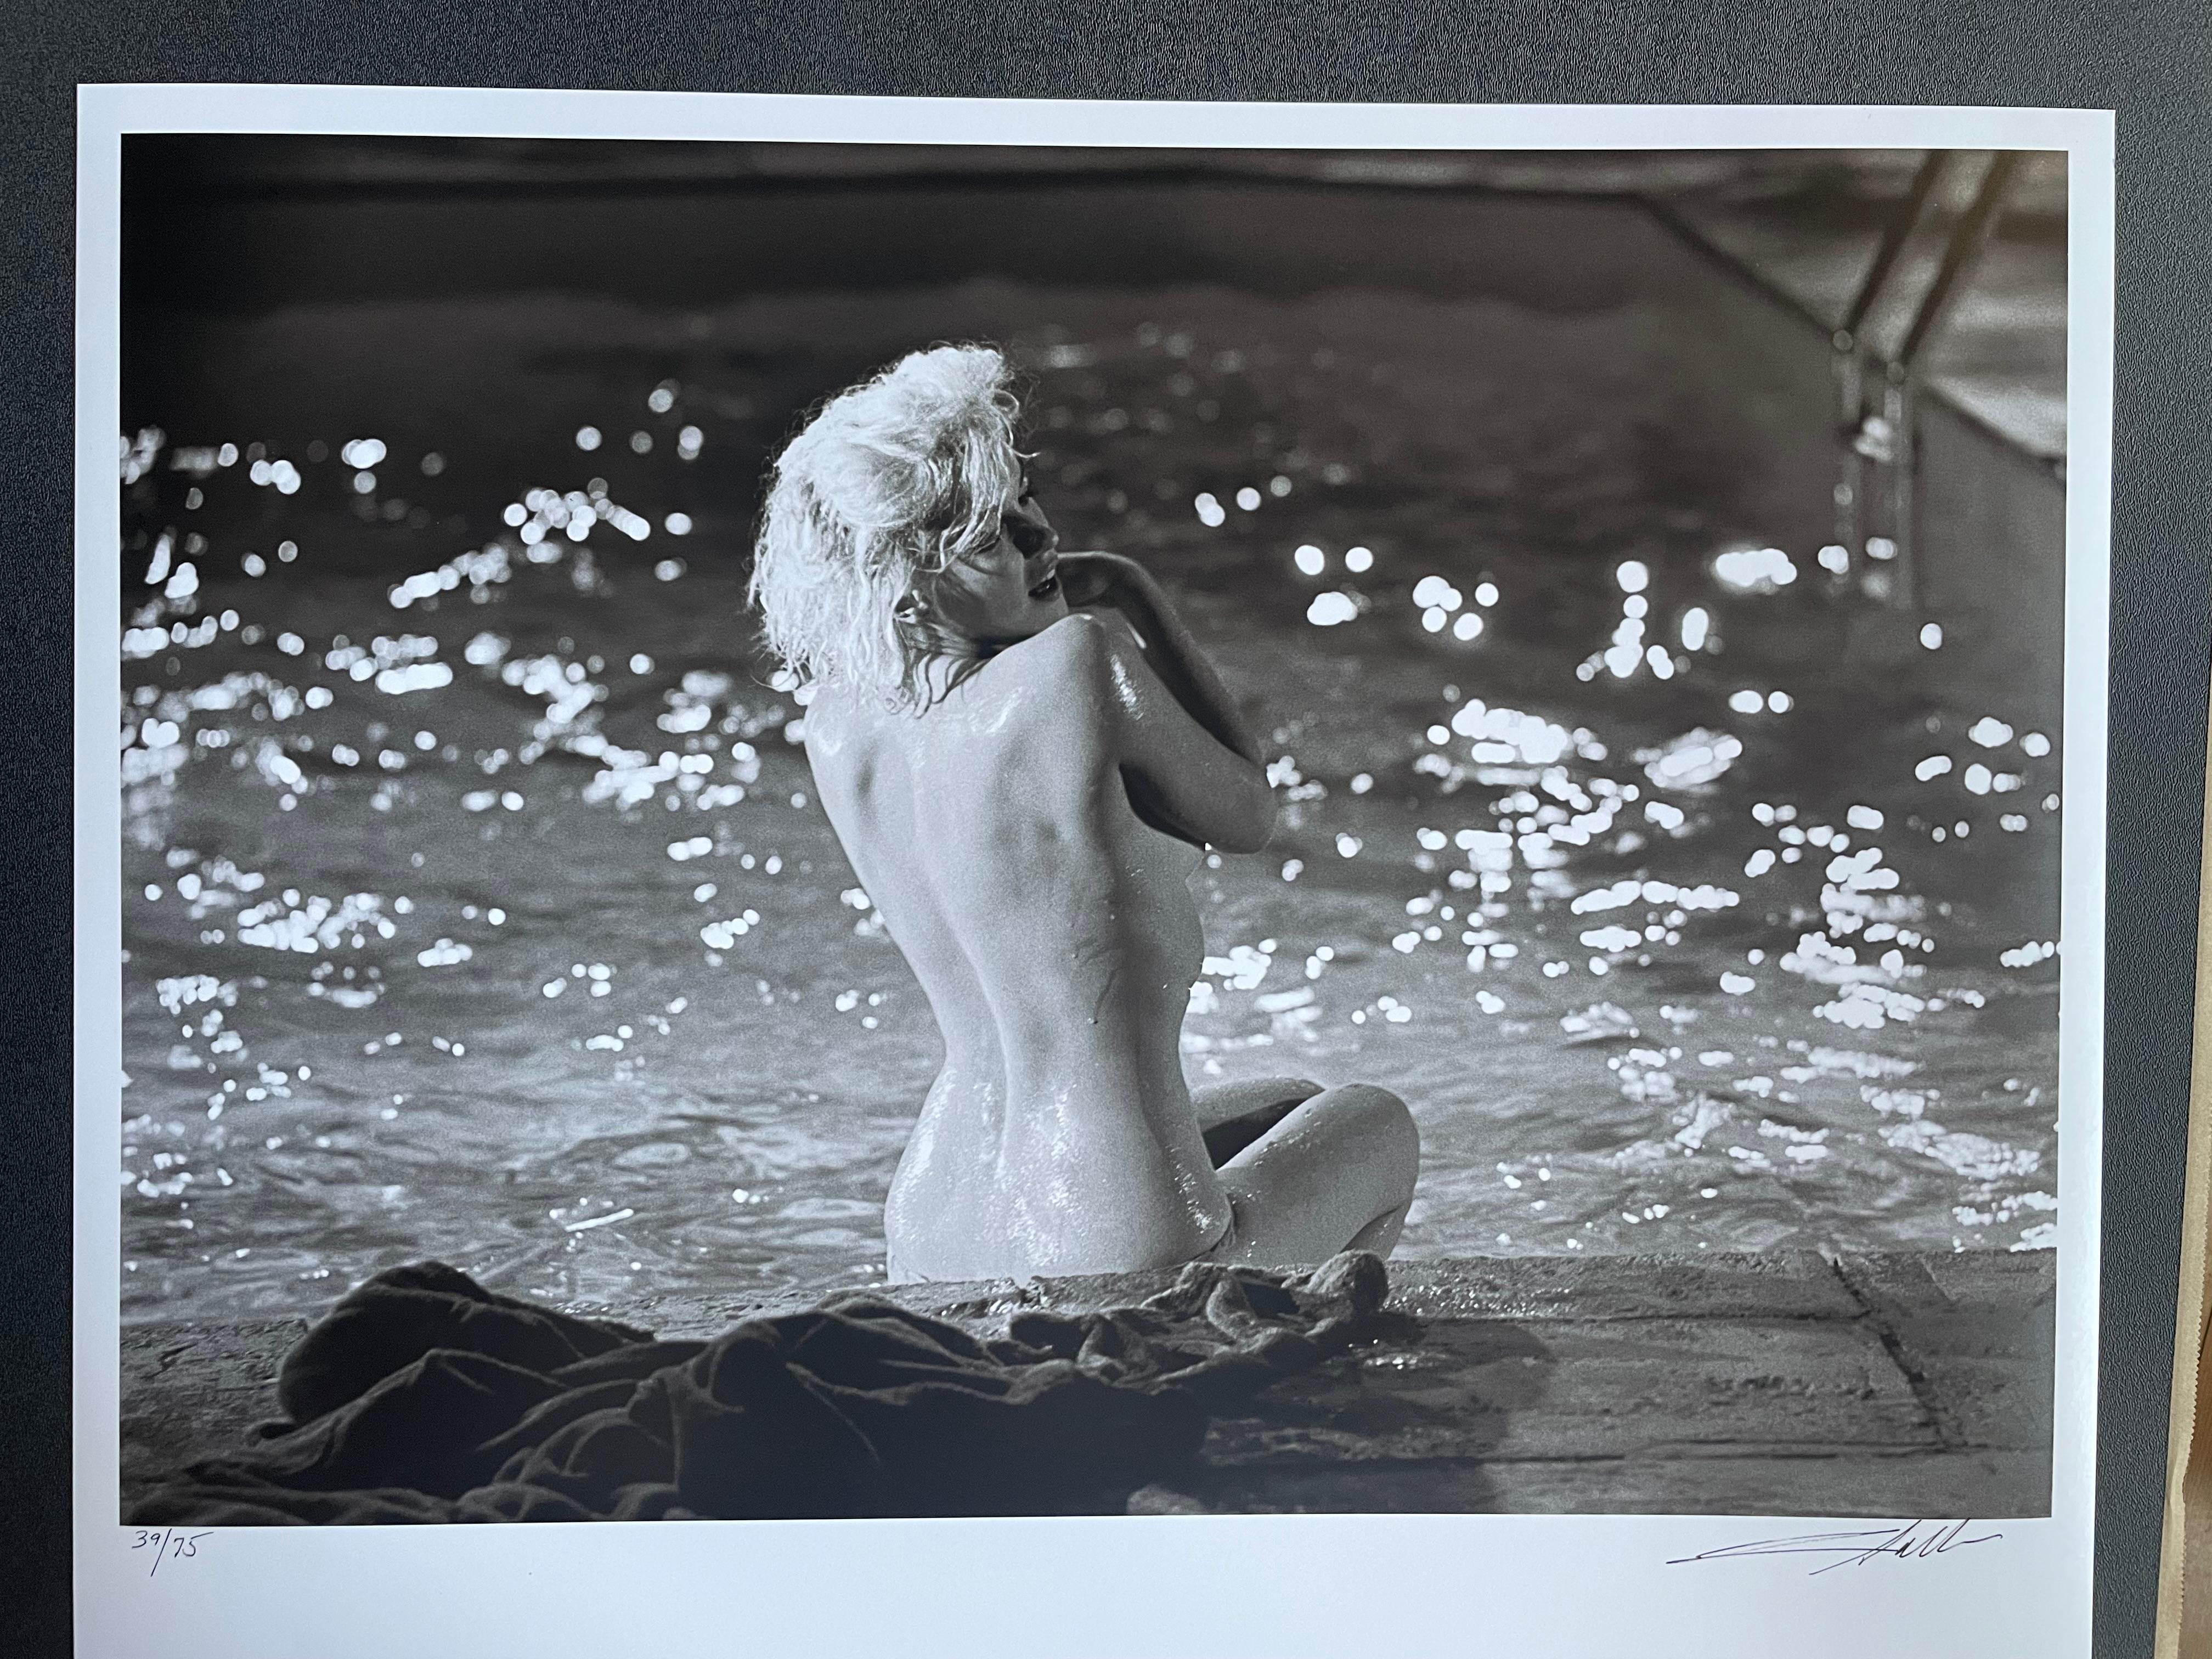 Marilyn Monroe Back, Somethings Gotta Give - Black Black and White Photograph by Lawrence Schiller